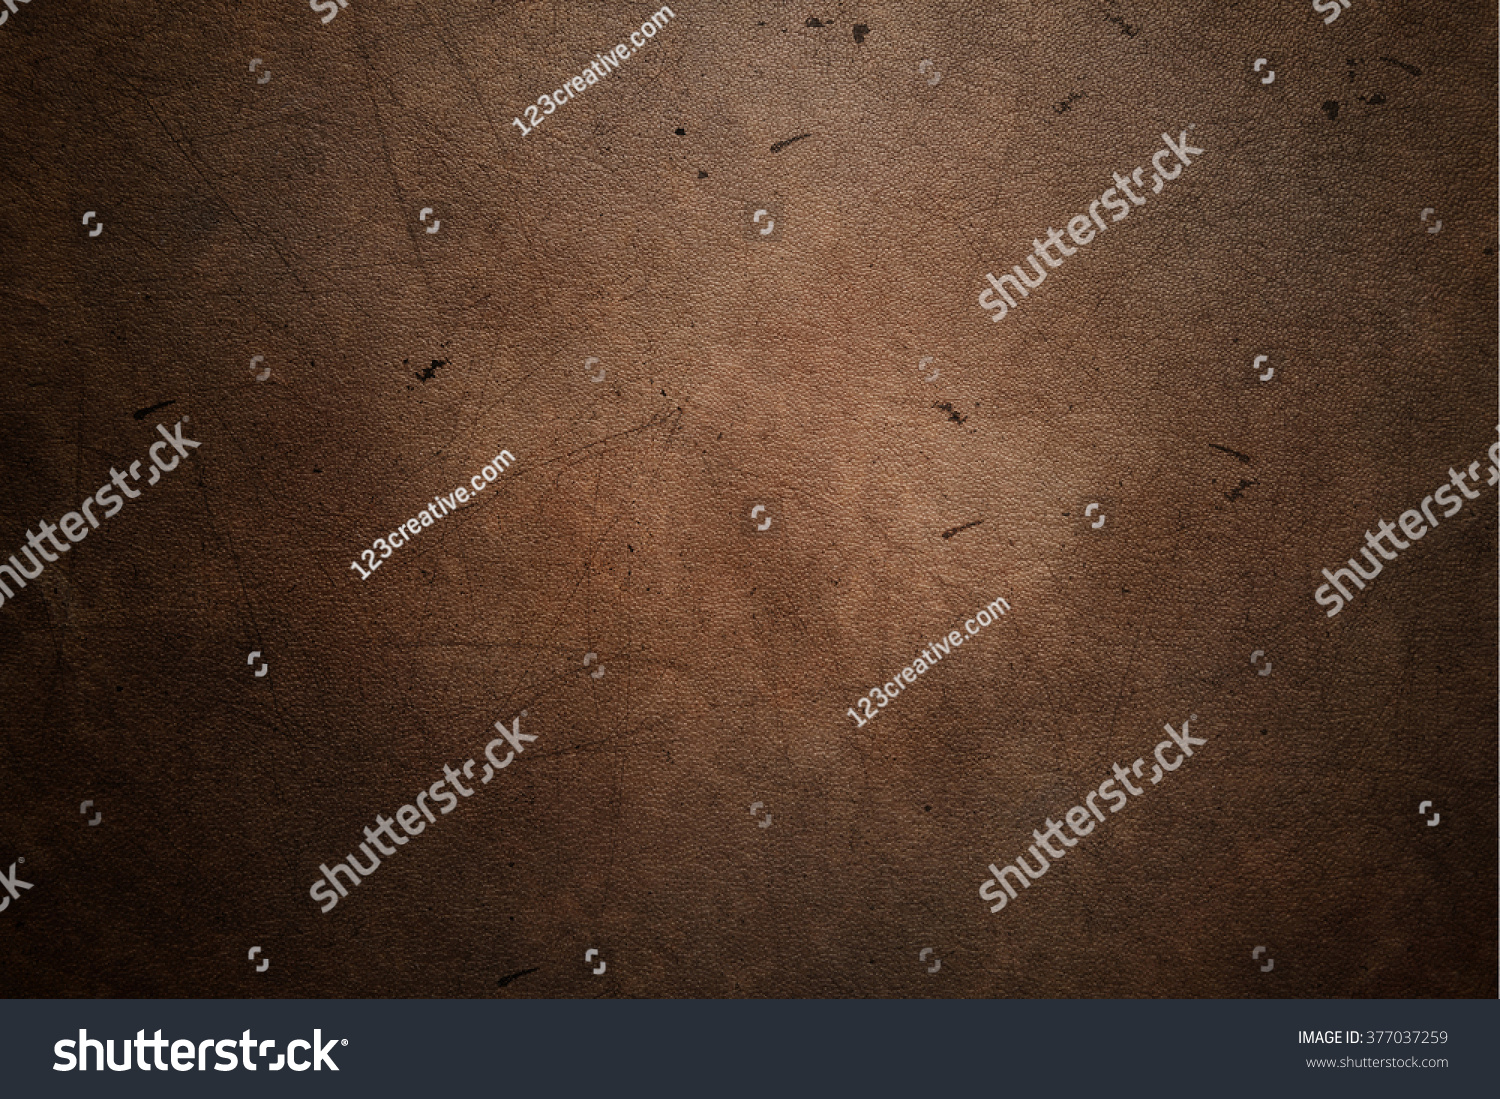 Worn leather with stains texture background #377037259